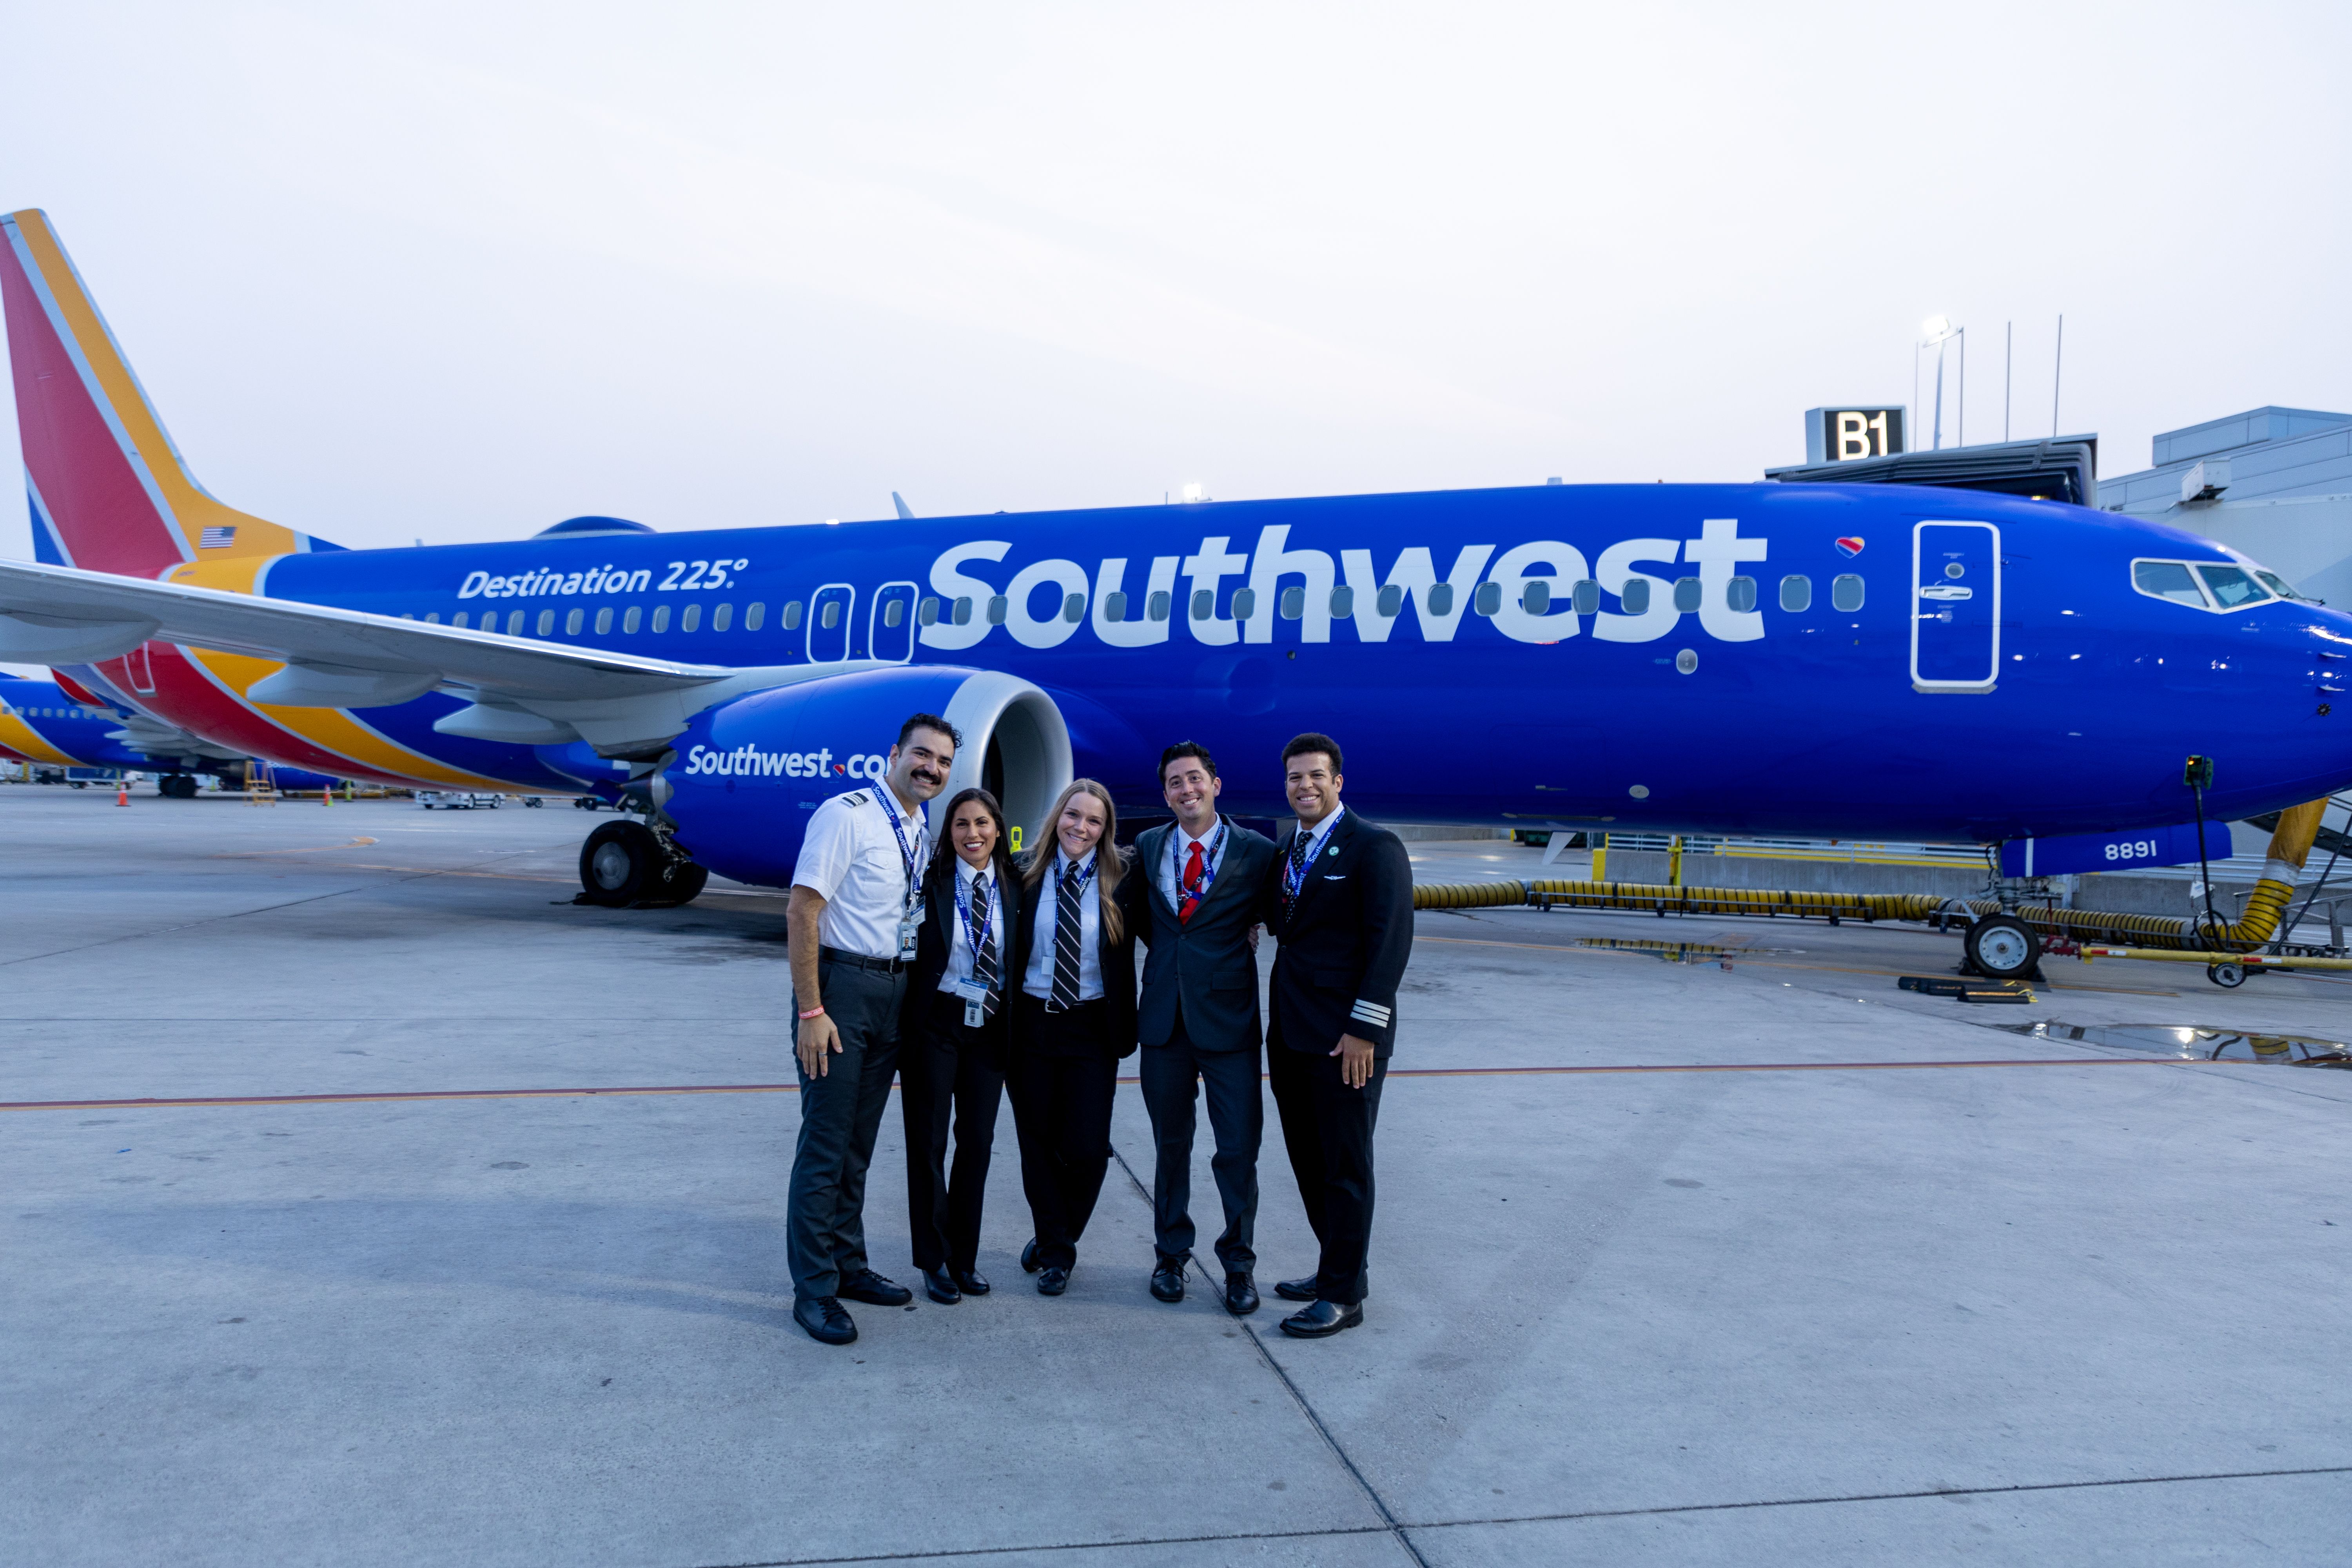 Pilots in front of a Southwest aircraft